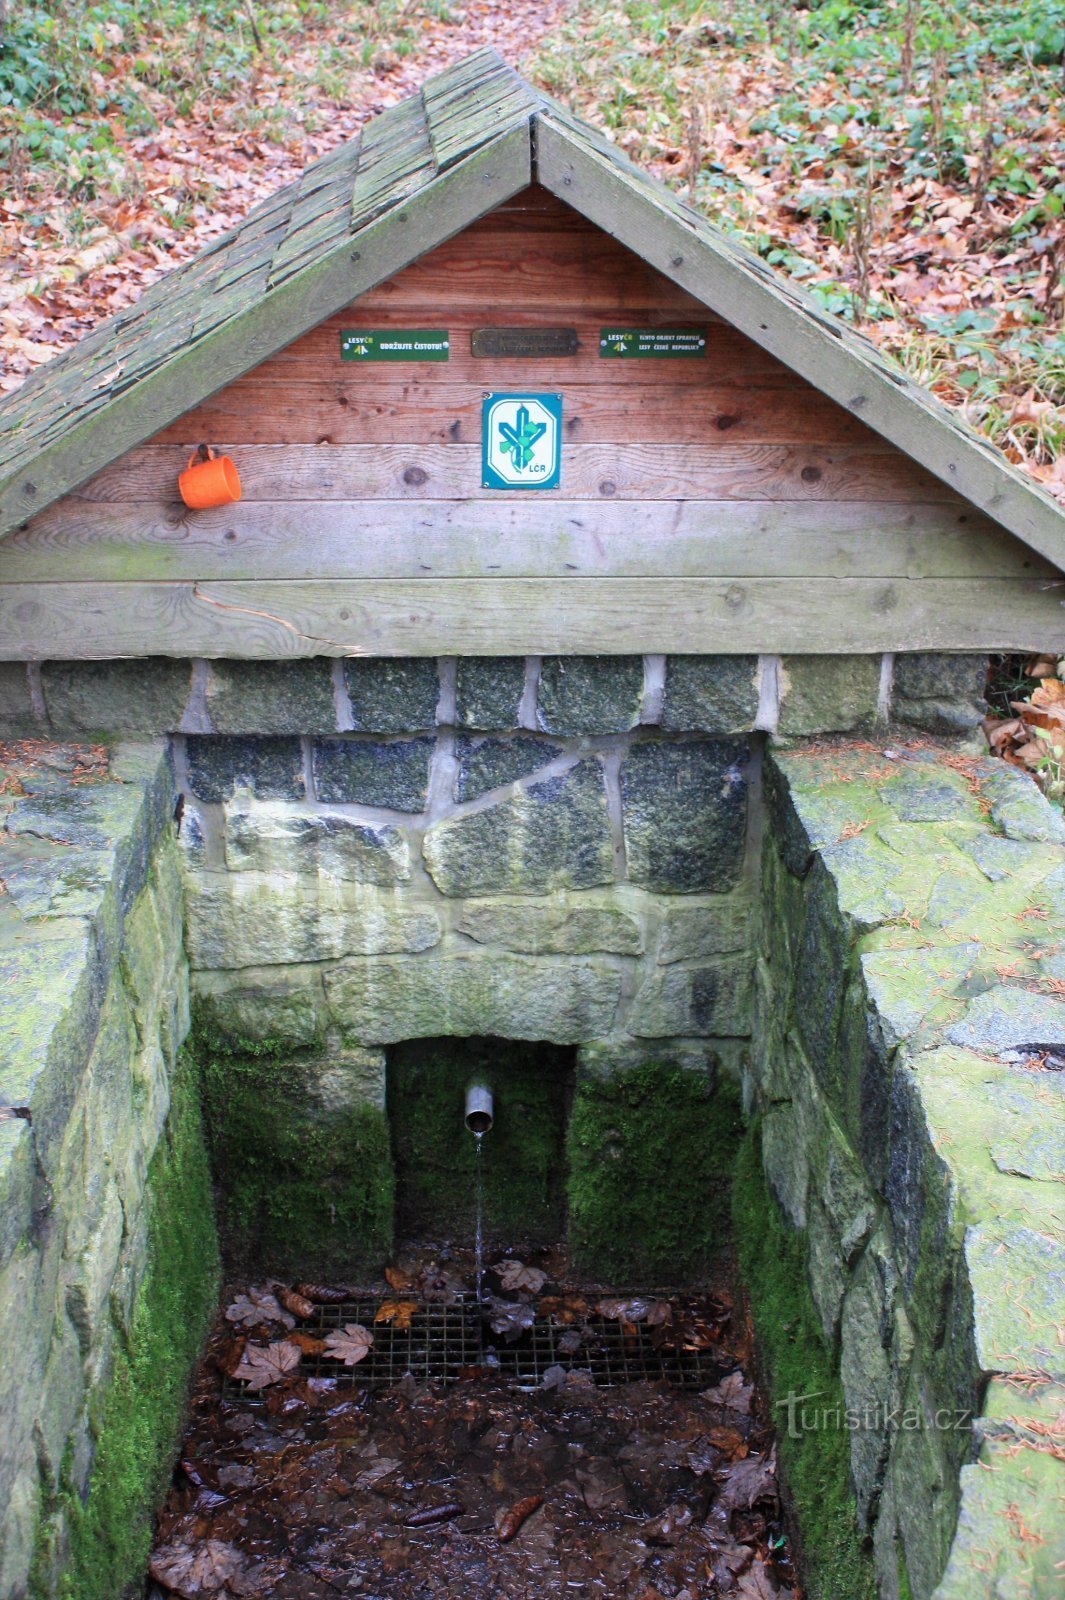 Detail of the well